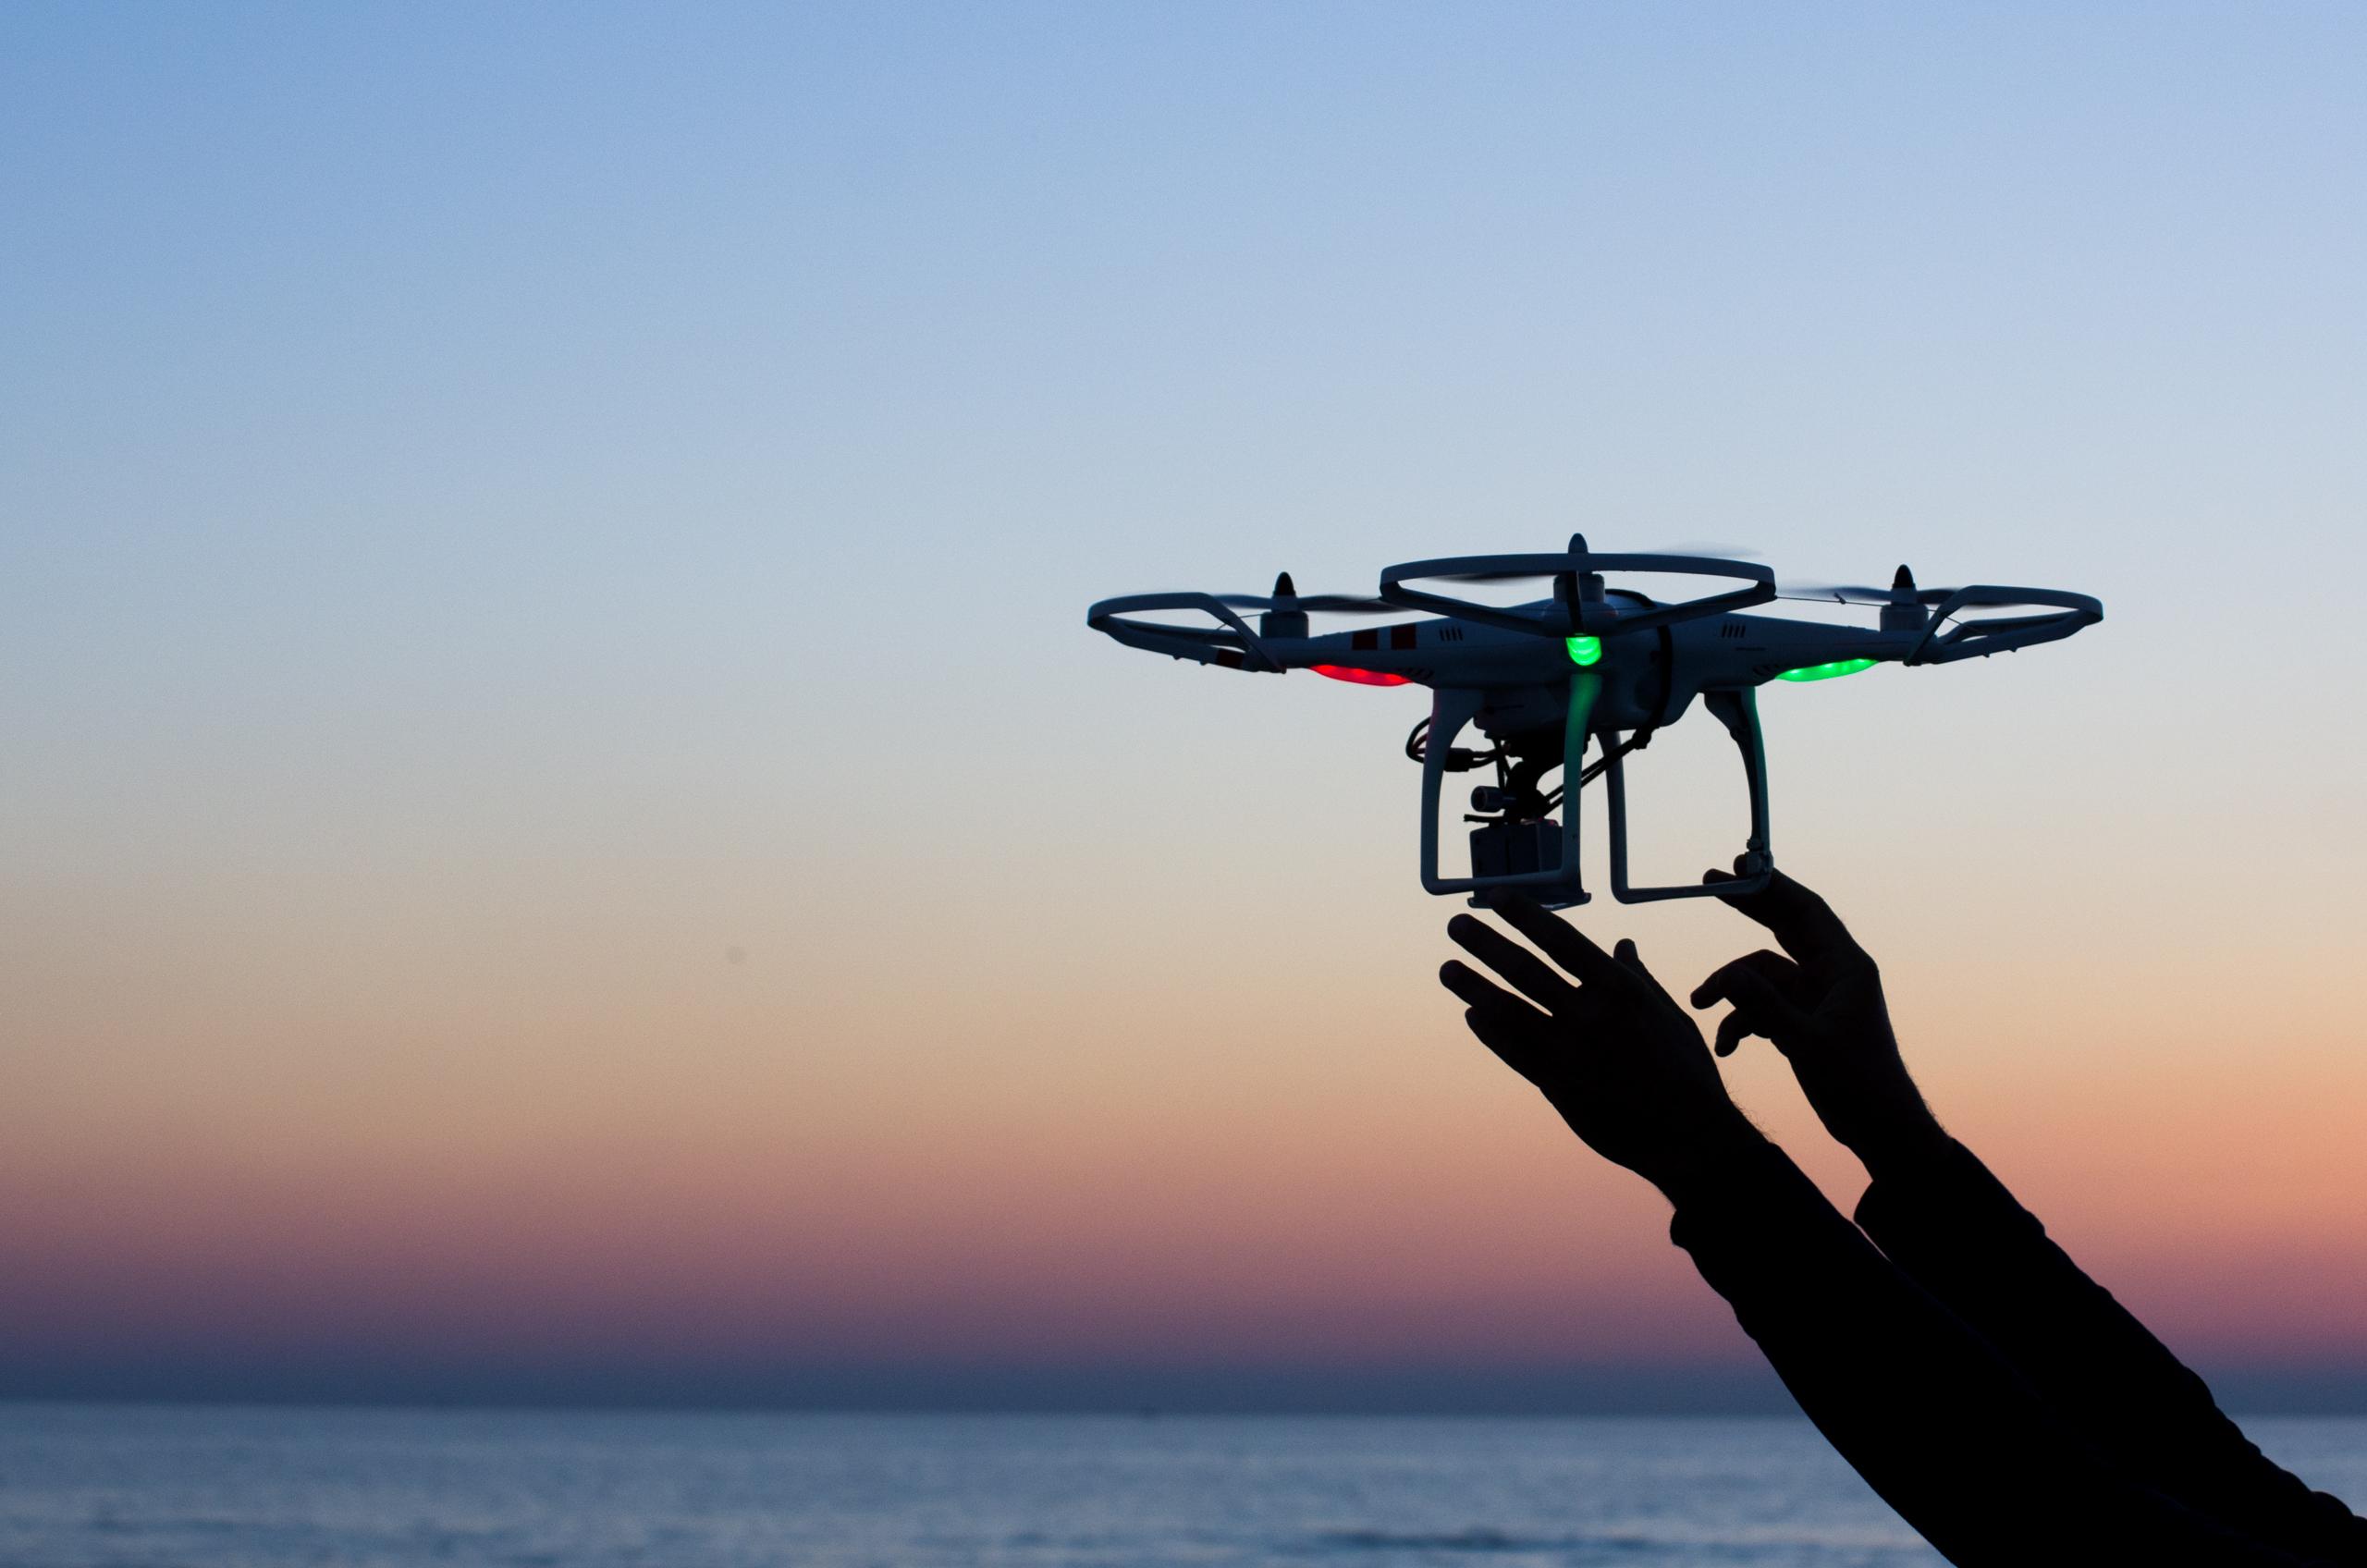 Viareggio, Italy - October 30, 2014: Drone takes off from the operator's hand with camera at sunset Quadcopter industry is told to be growing at triple digitsevery year, for a market expected to pass the 20 billion in the 2020. The dji is a chinese company leader of quadcopter industry, and the phantom is expected to be the top seller gift for christmas 2015. (Photo Credit)